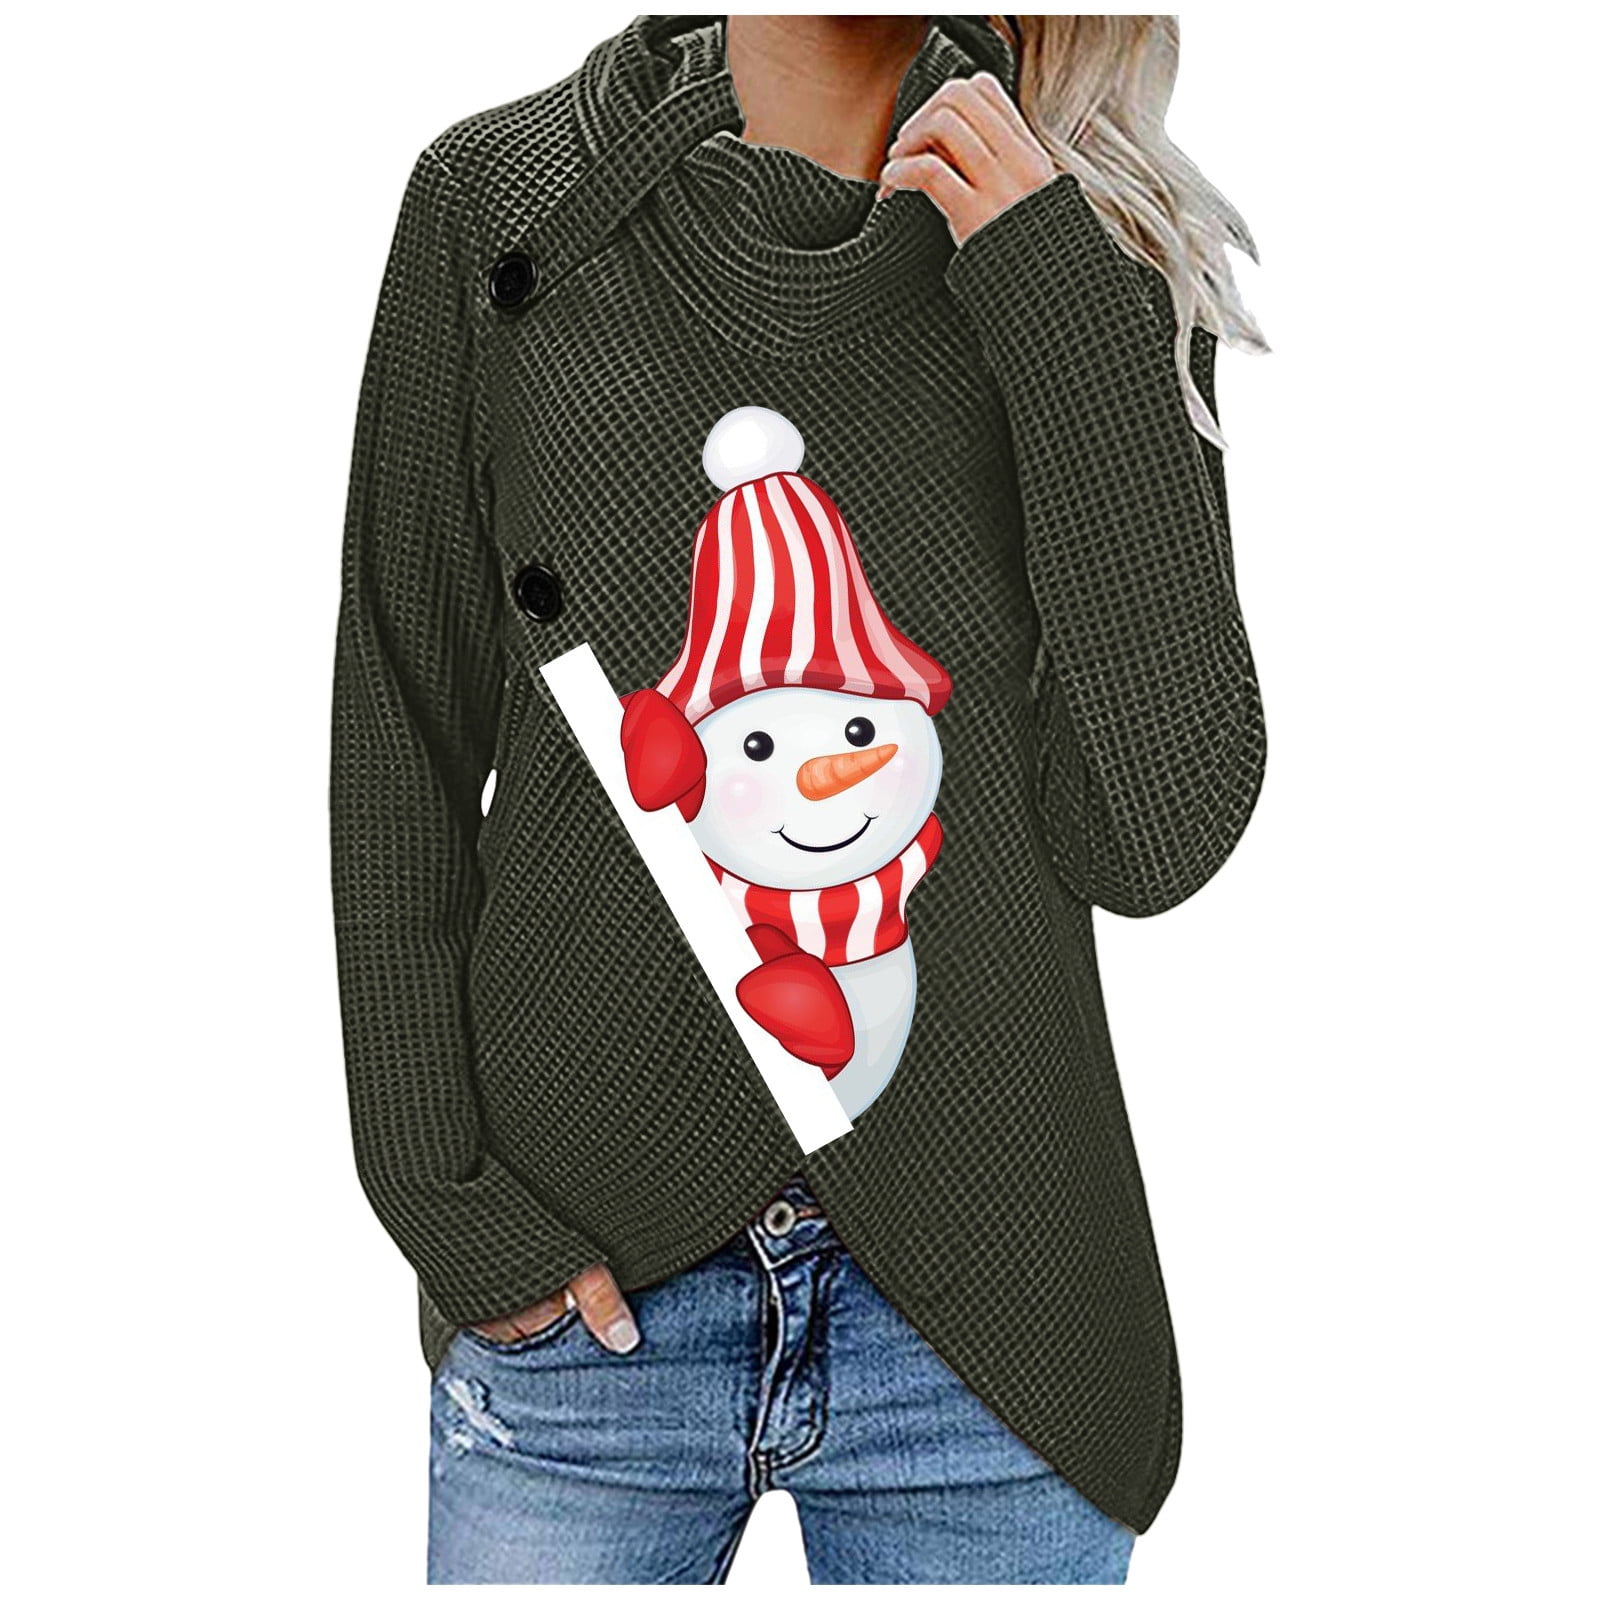 Christmas Tunics for Women to Wear with Leggings Cute Snowman Printed Crewneck Long Sleeve Fall Tops with Pockets 